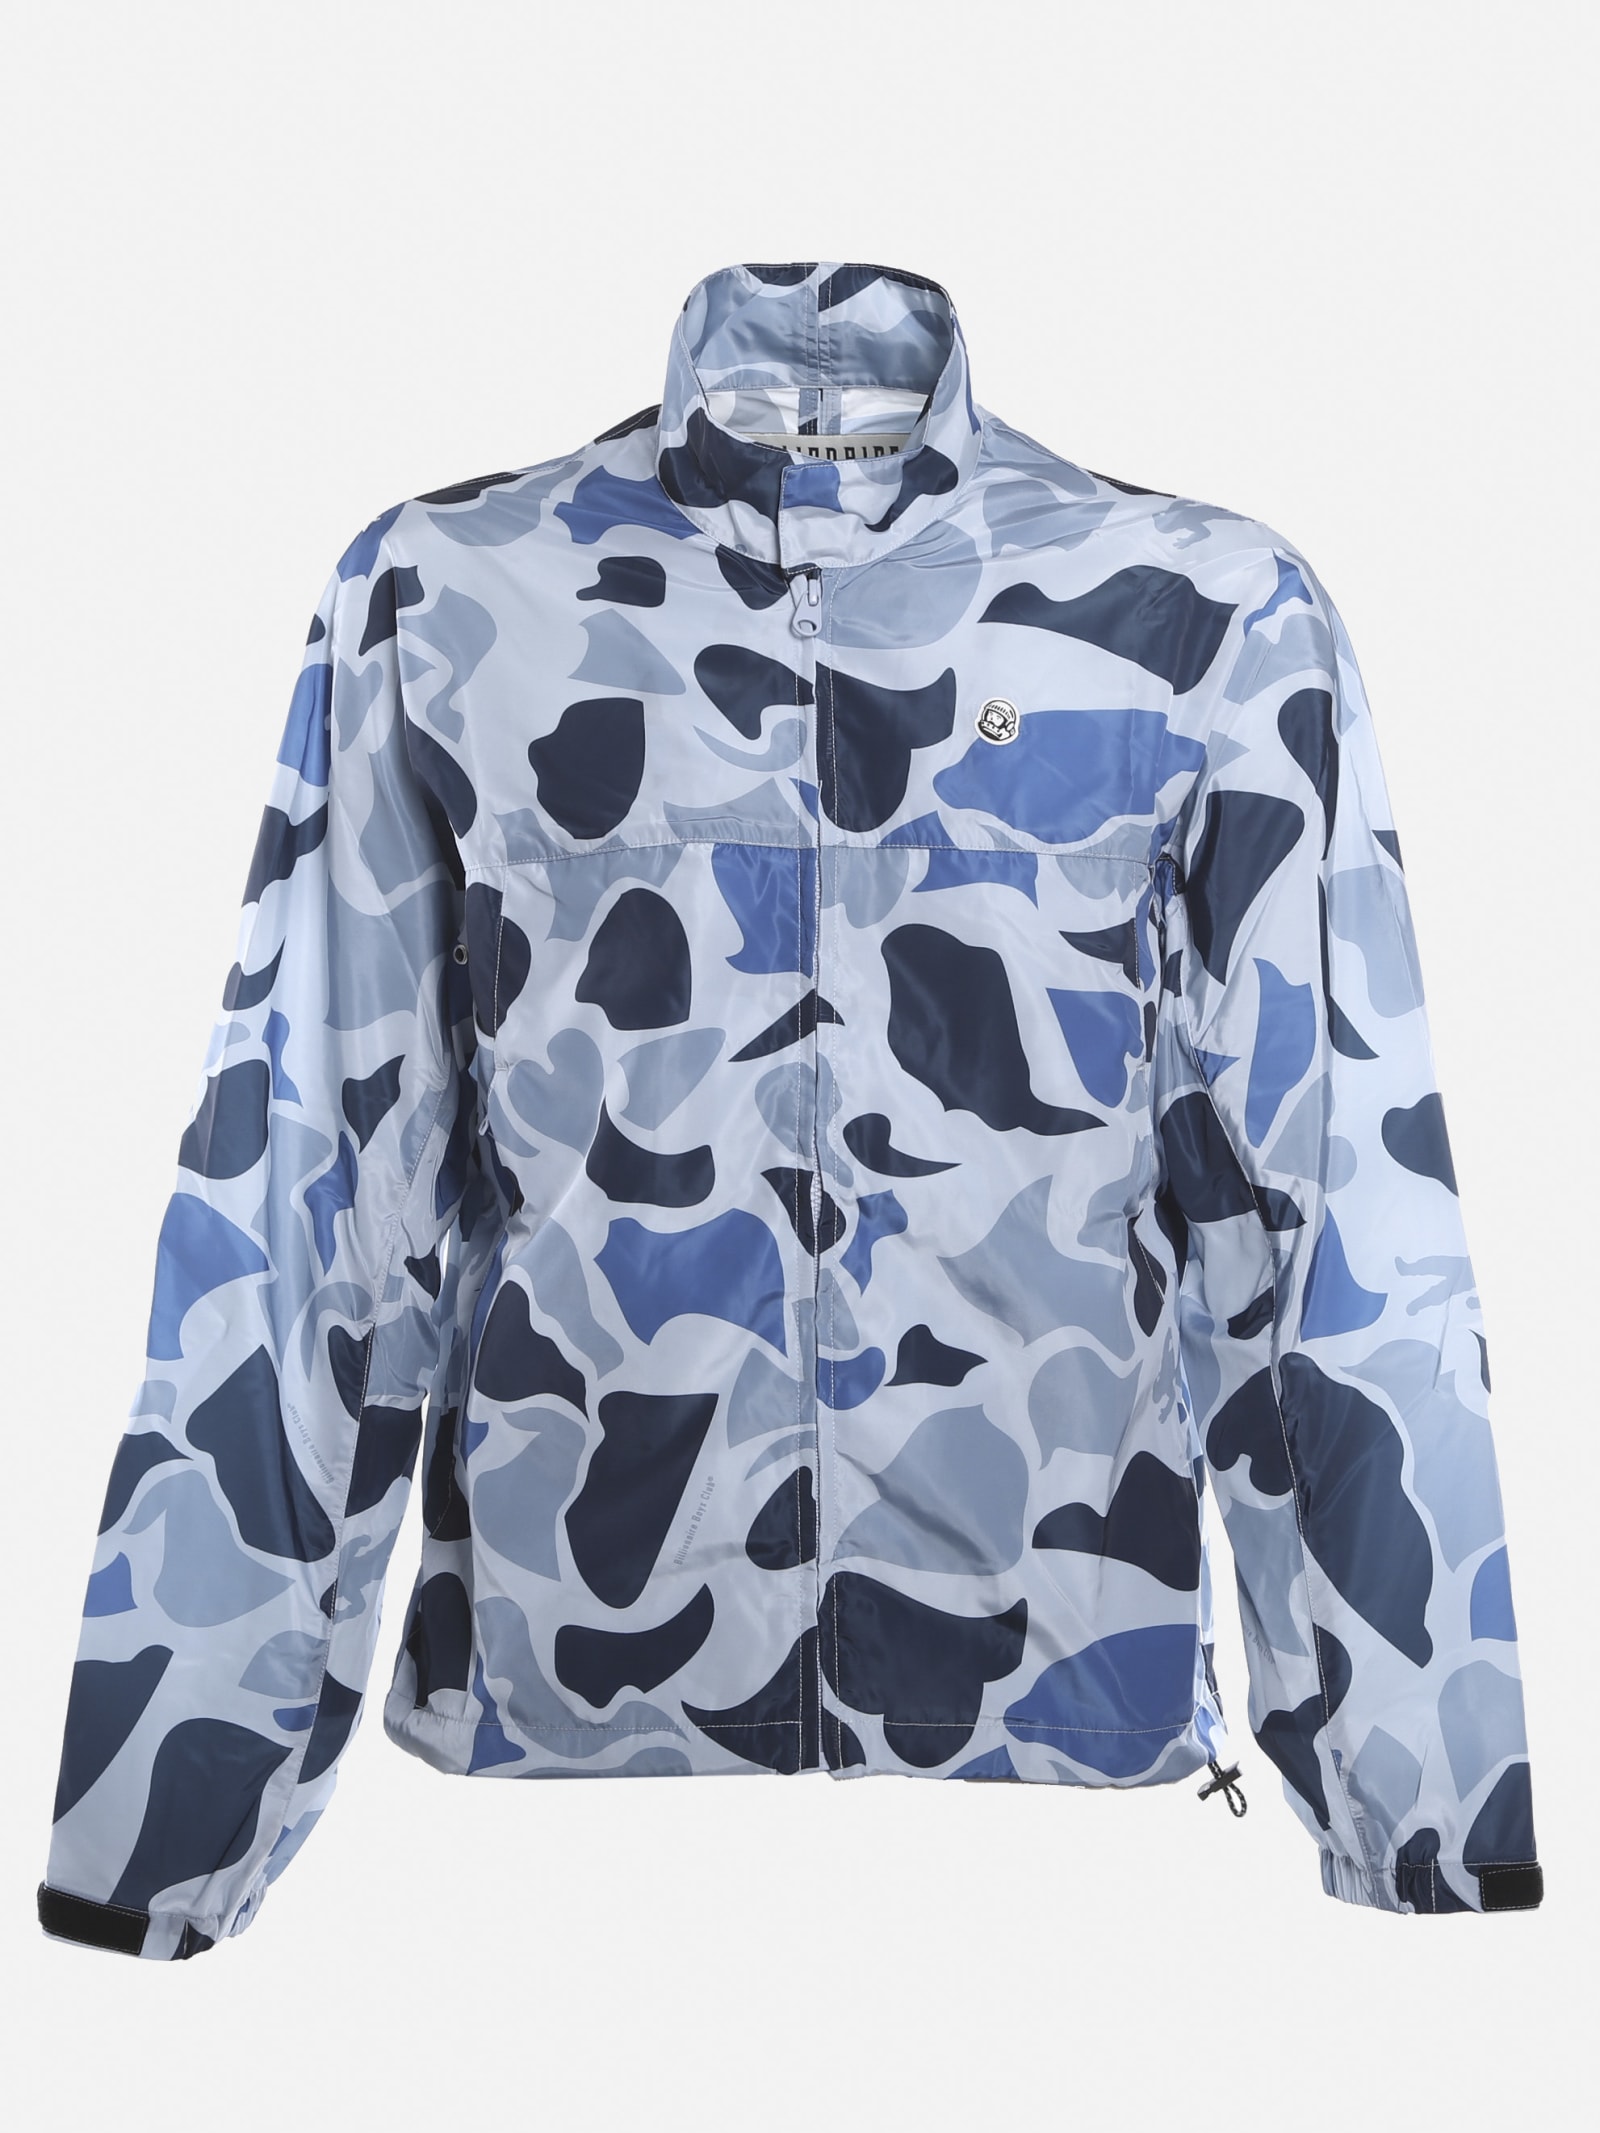 Billionaire Boys Club Technical Fabric Jacket With All-over Camouflage Print